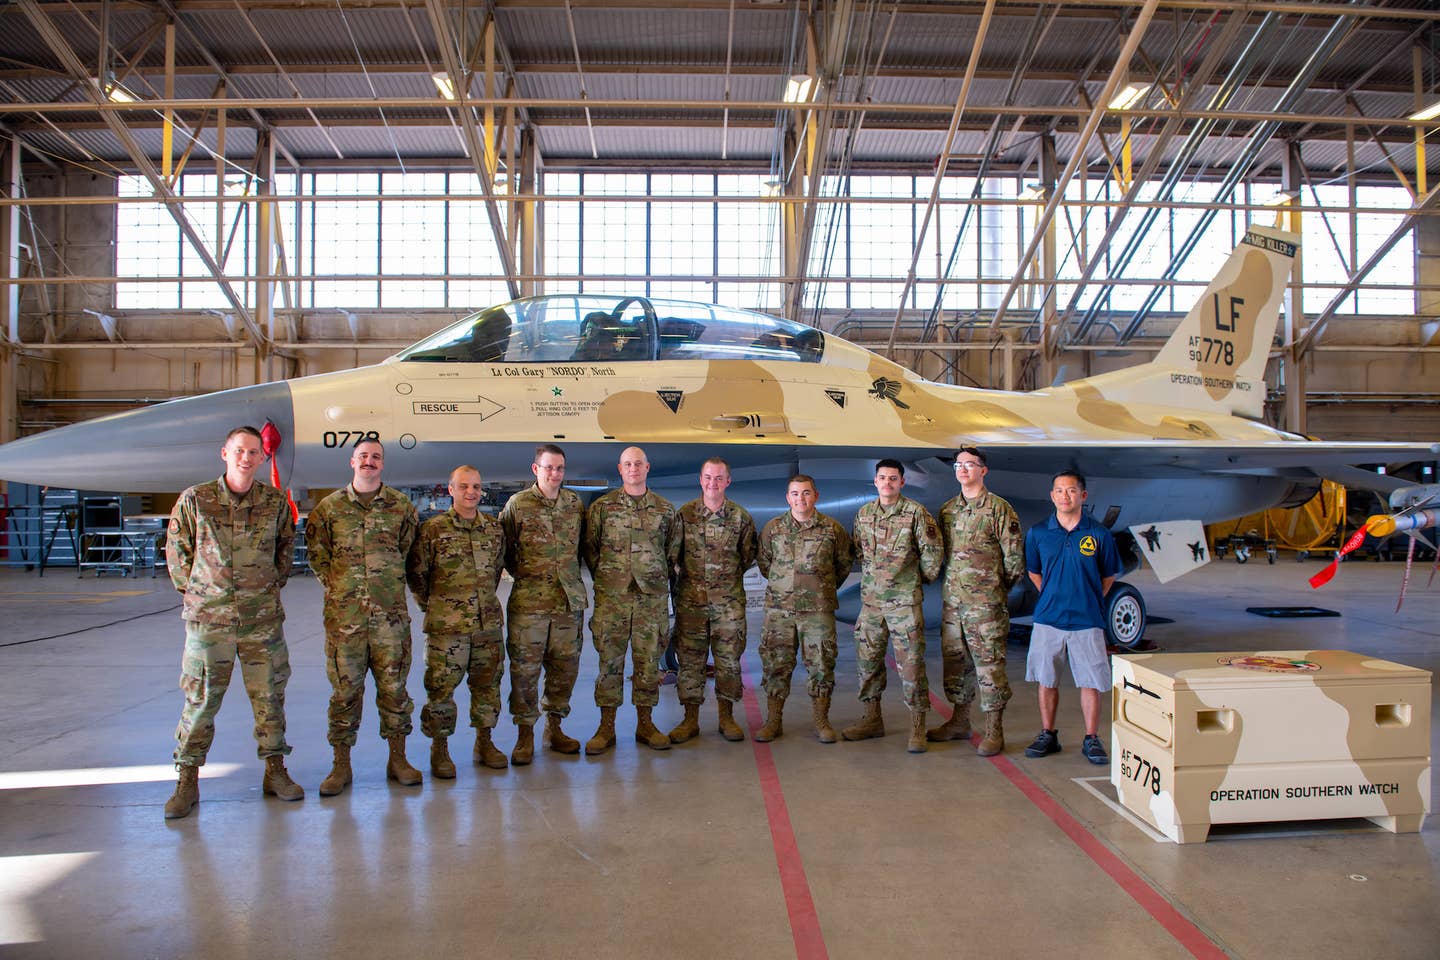 Members of the fabrication flight’s corrosion control team stand with their newly painted F-16D Fighting Falcon during an unveiling ceremony at the 310th Air Maintenance Unit hanger on June 17, 2022, at Luke Air Force Base Phoenix, Arizona. "Lt Col Gary 'NORDO' North" can be seen embossed below the cockpit. <em>USAF photo by Senior Airman Caleb F. Butler</em>